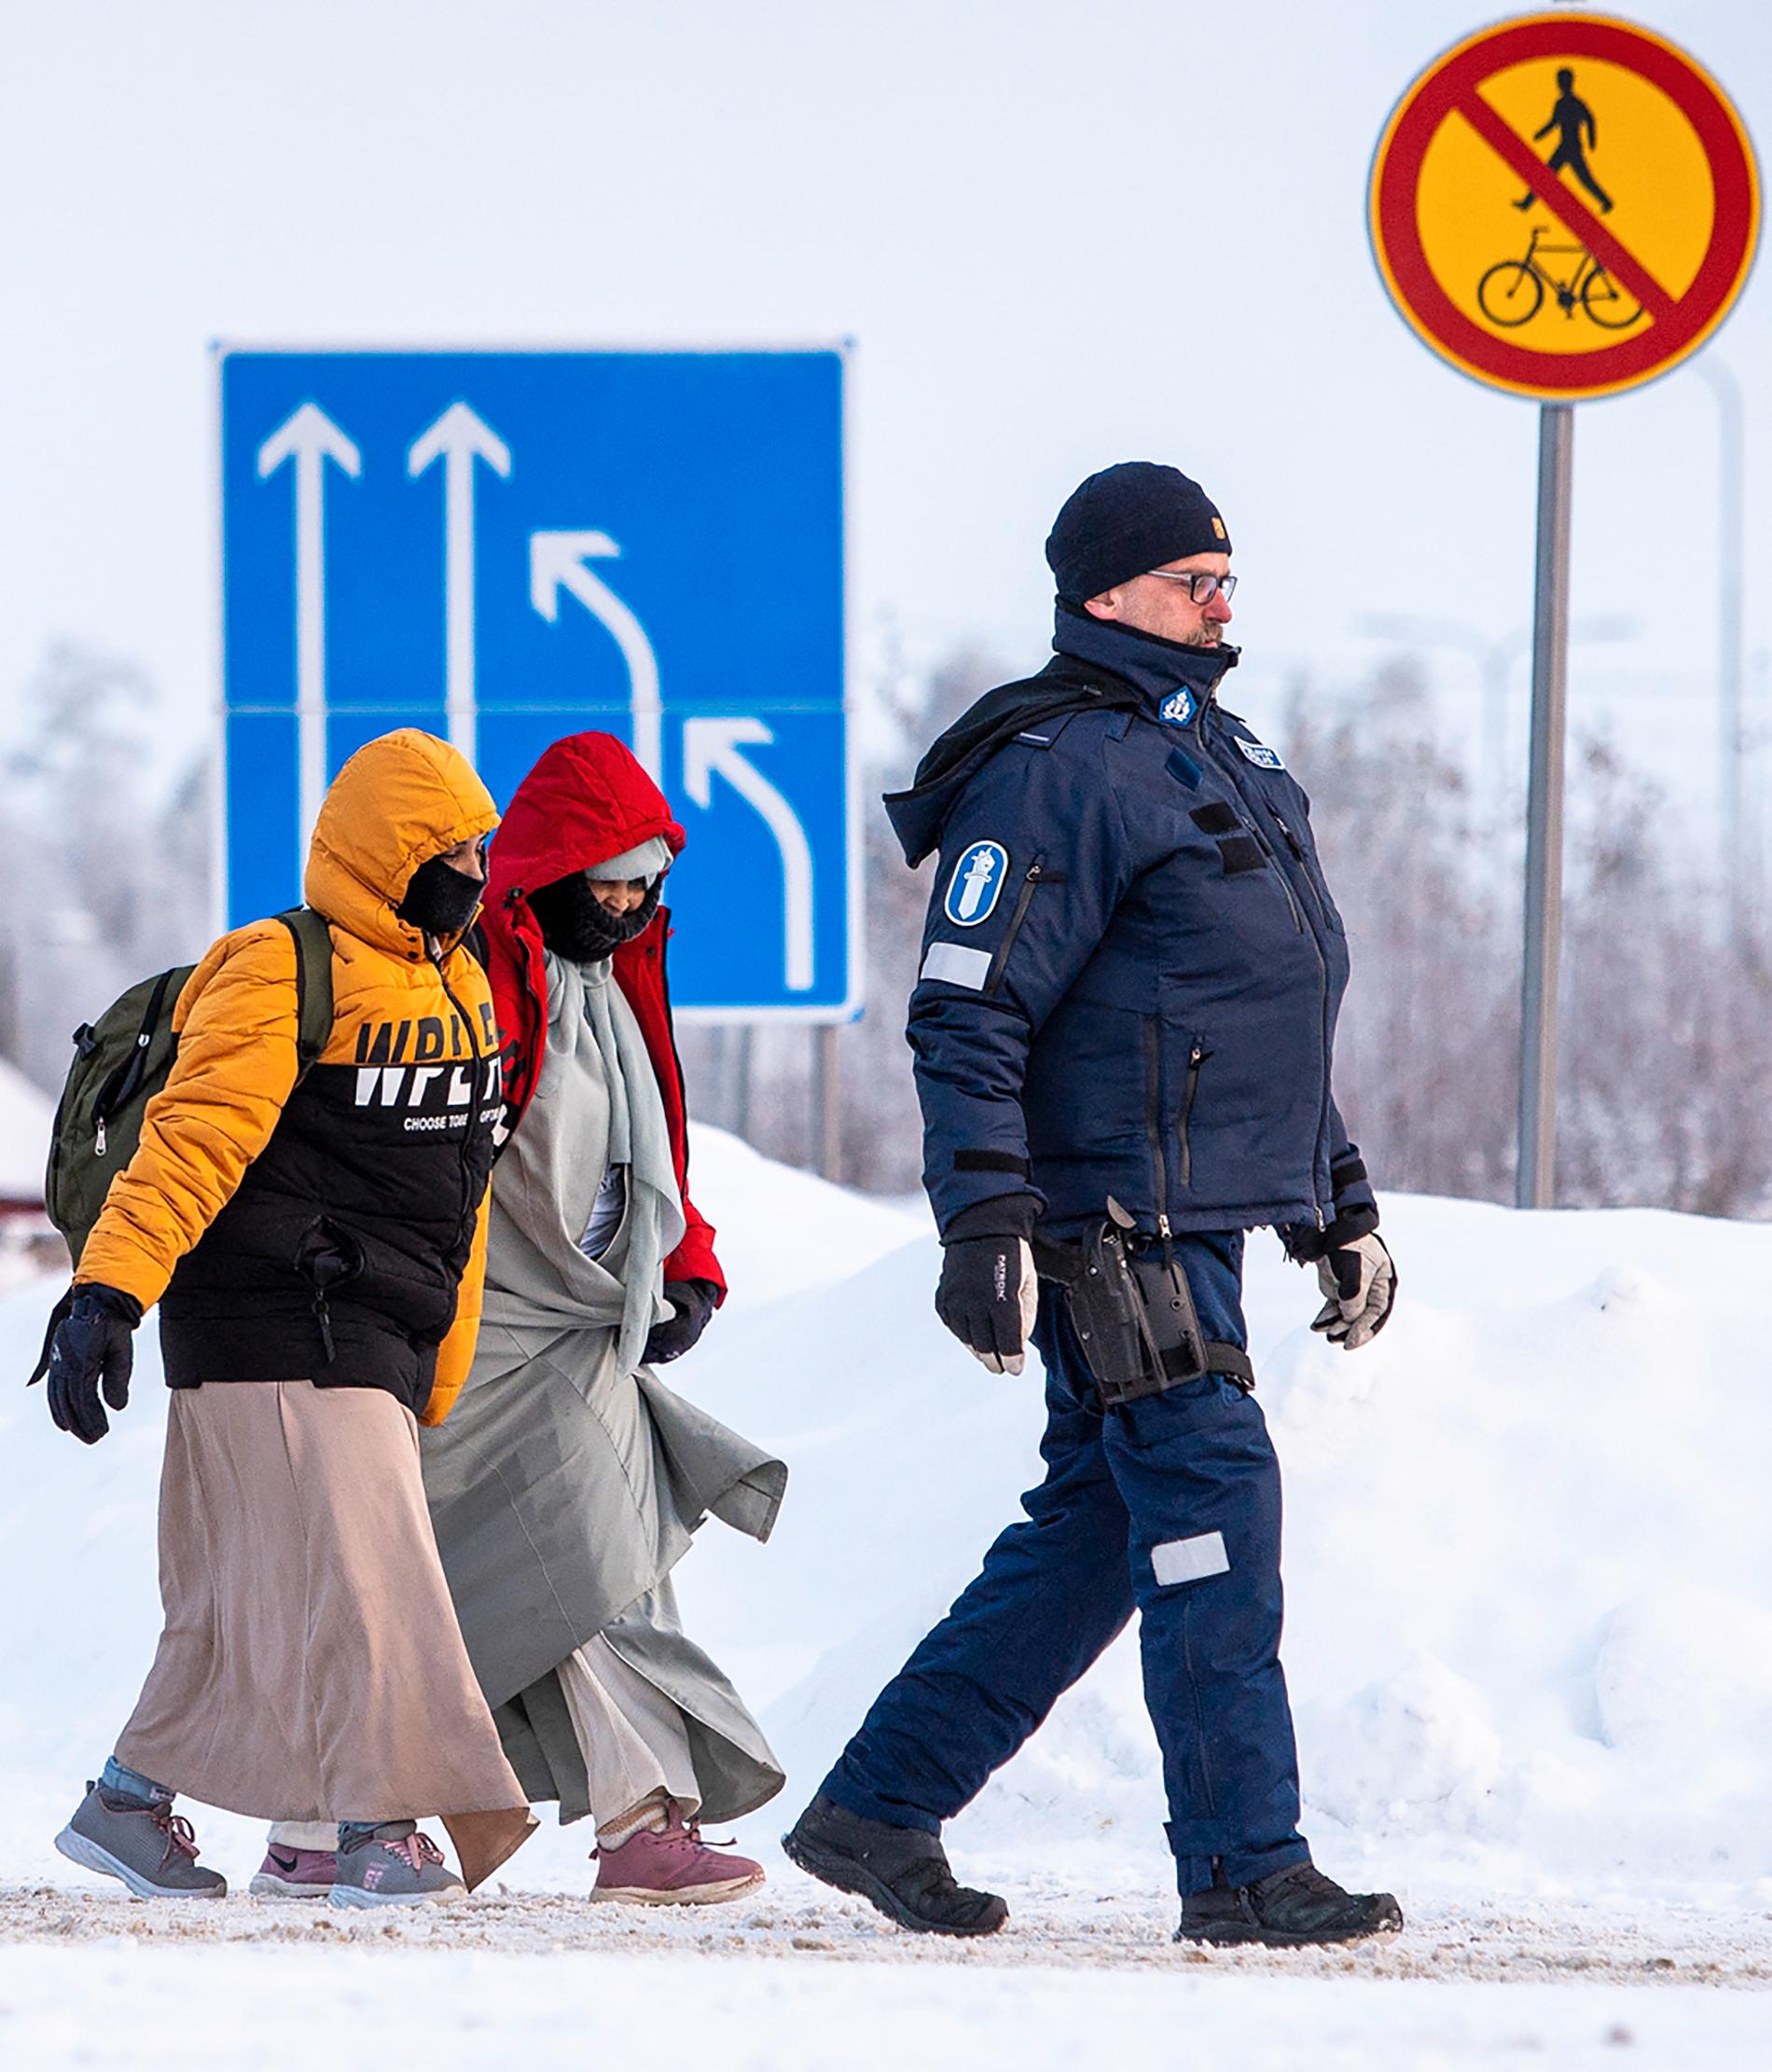 Border: On Tuesday, Finnish border police escorted refugees after they arrived at the Vartius crossing from Russia.